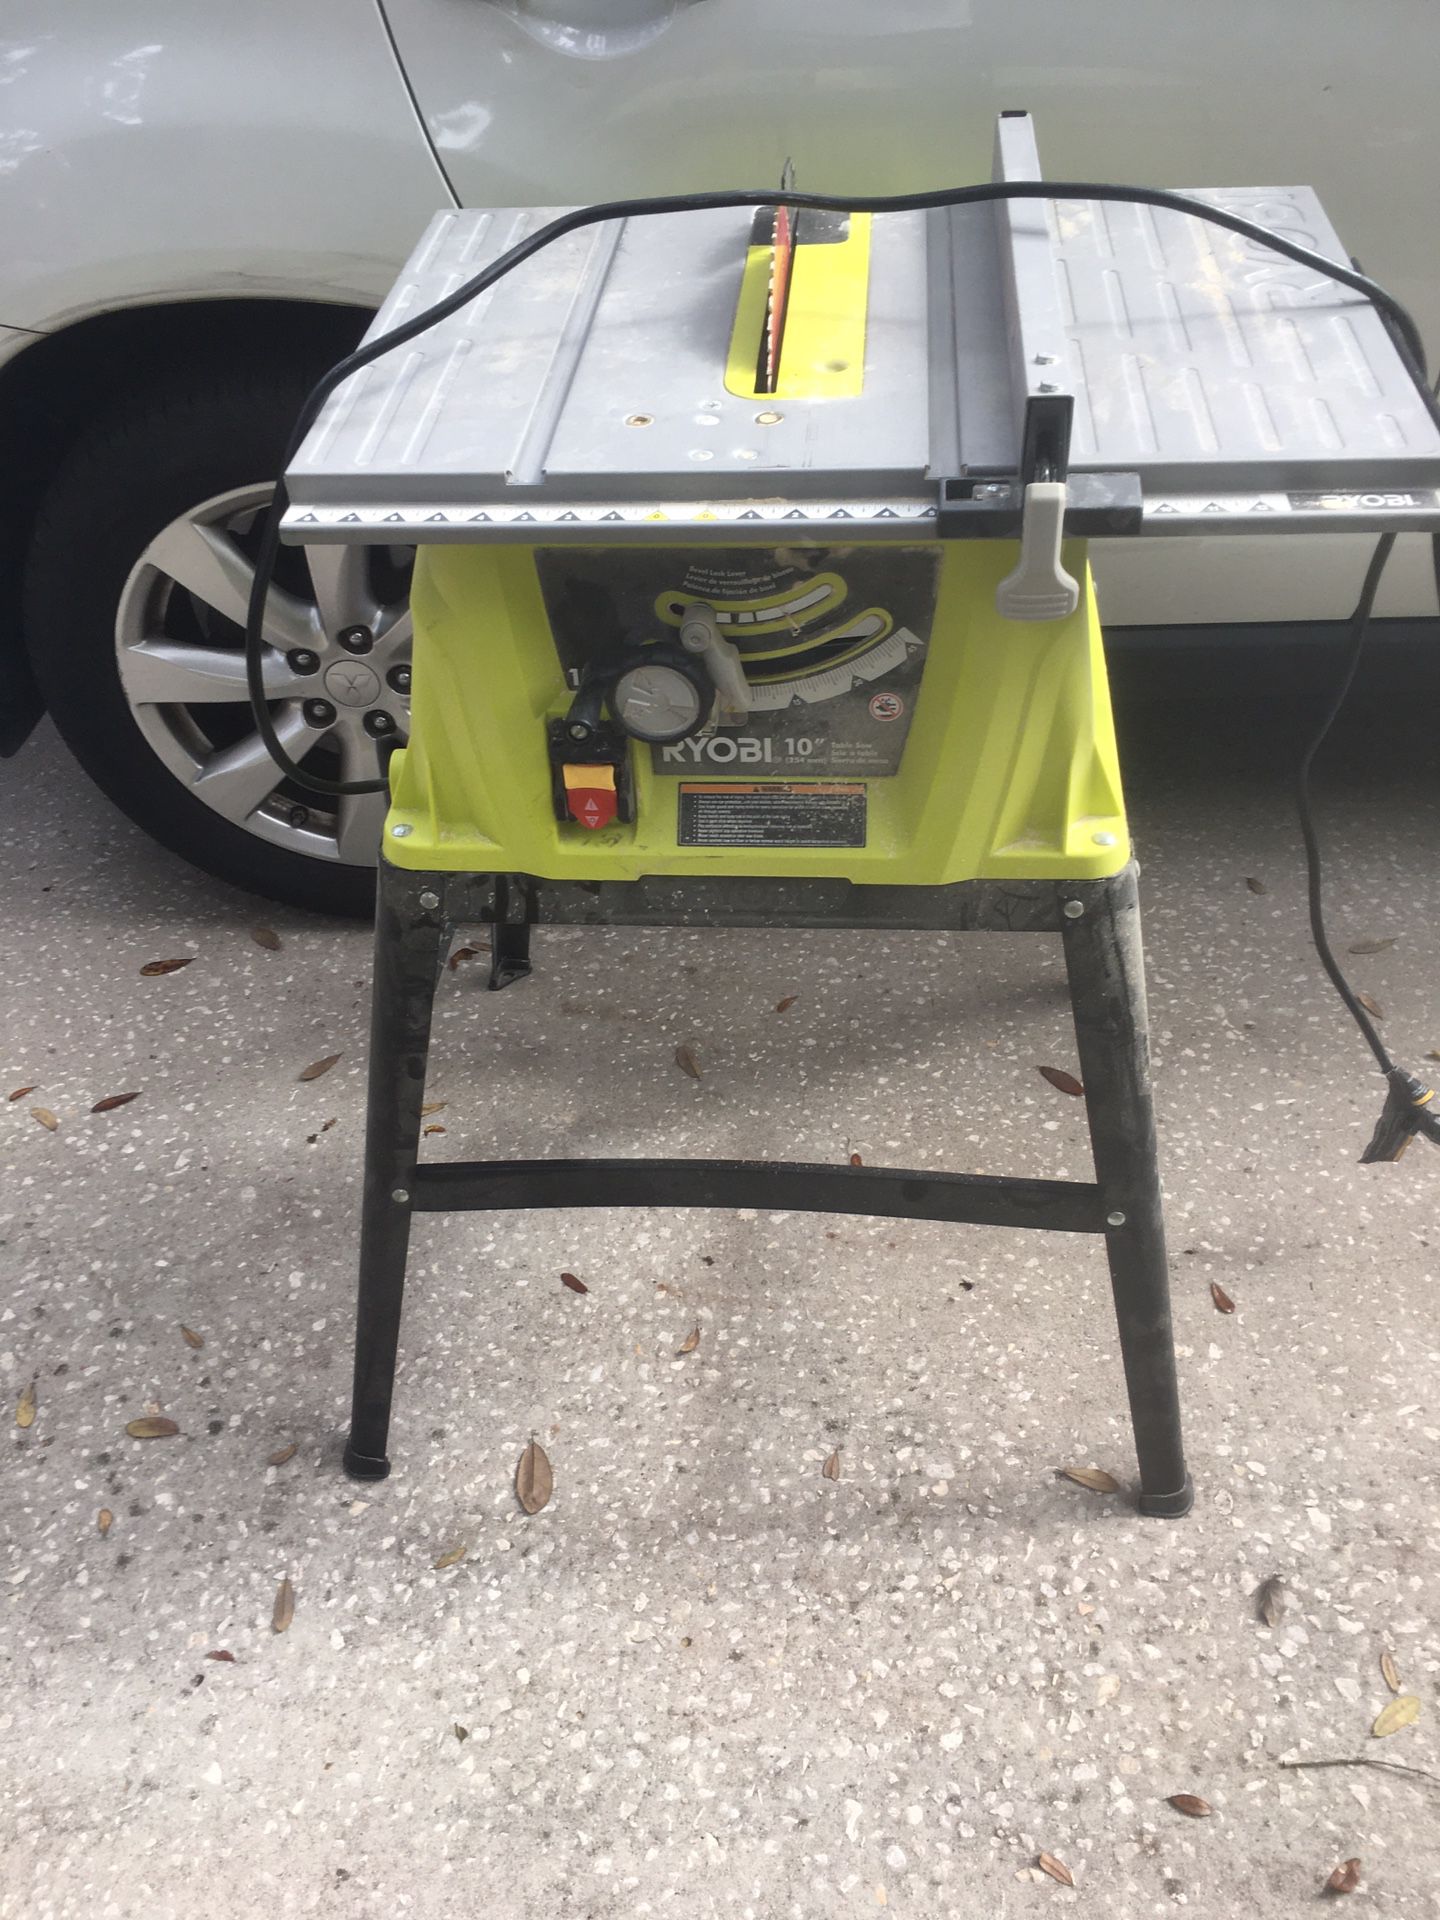 Ryobi 10” table saw with Diablo blade push stick and fence. Great saw for beginners and hobbyists. Everything works great.